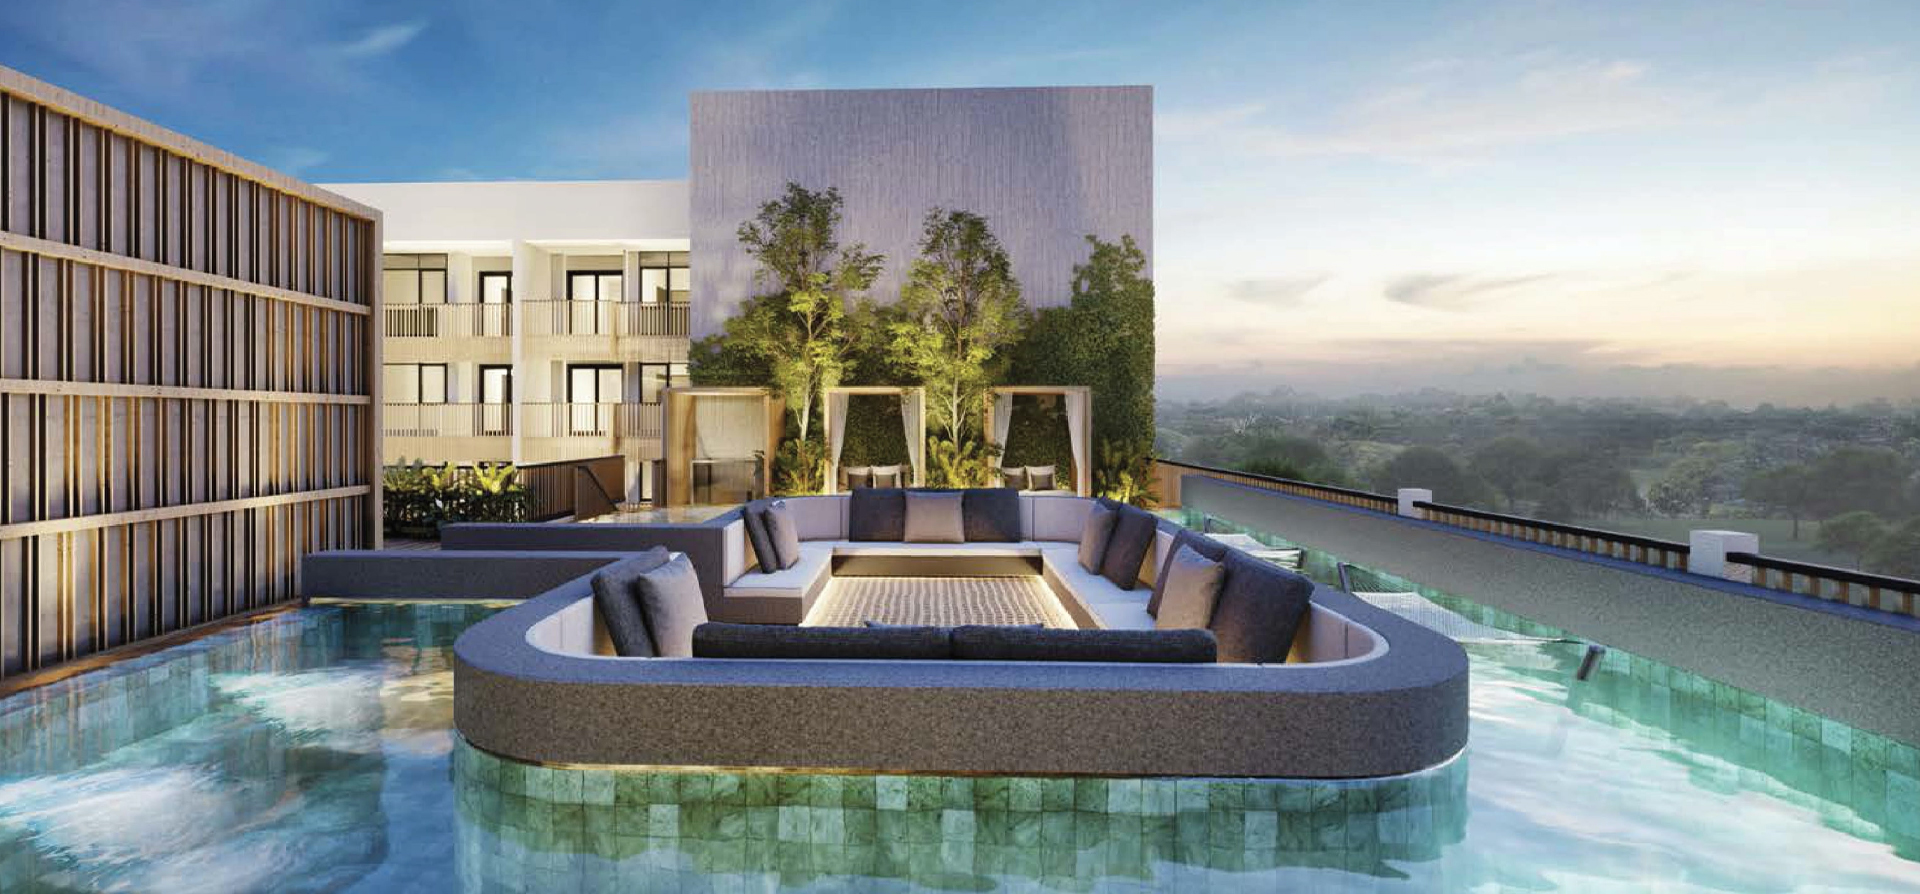 Mori Condo with Rooftop swimming pool facing Guillemard Road